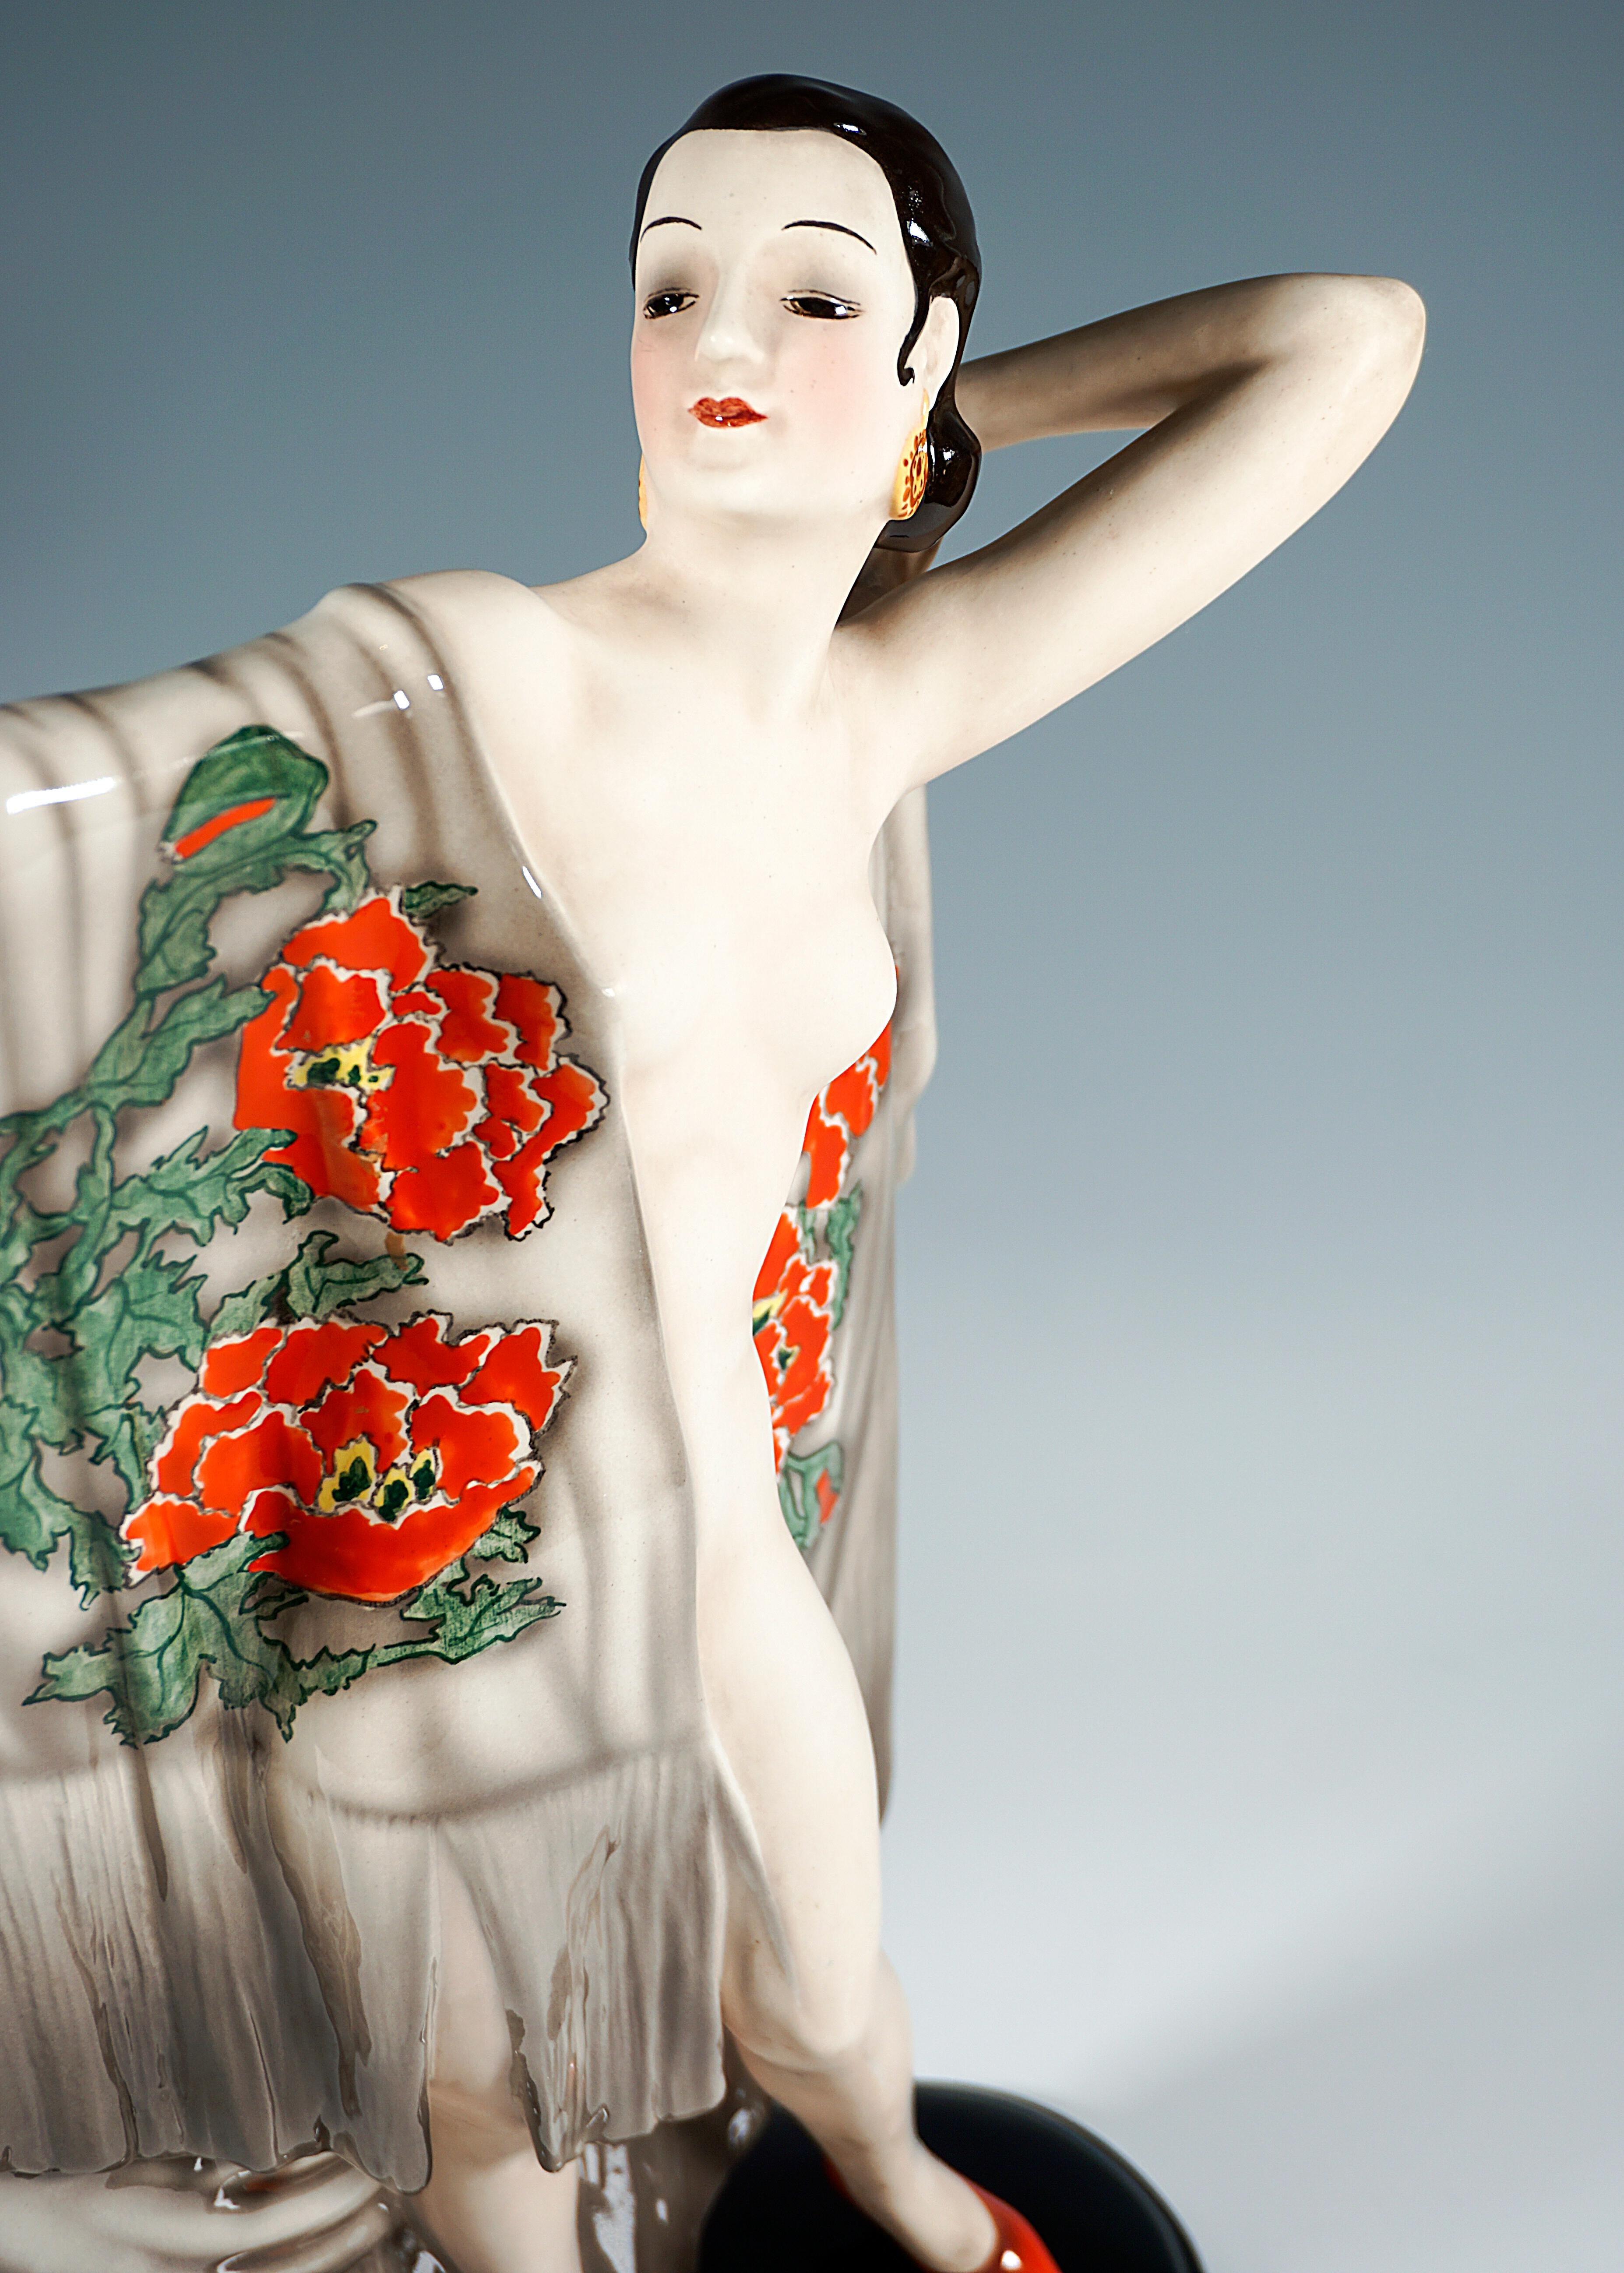 Hand-Crafted Goldscheider Vienna Spanish Lady Nude With Cloth by Josef Lorenzl, circa 1940 For Sale